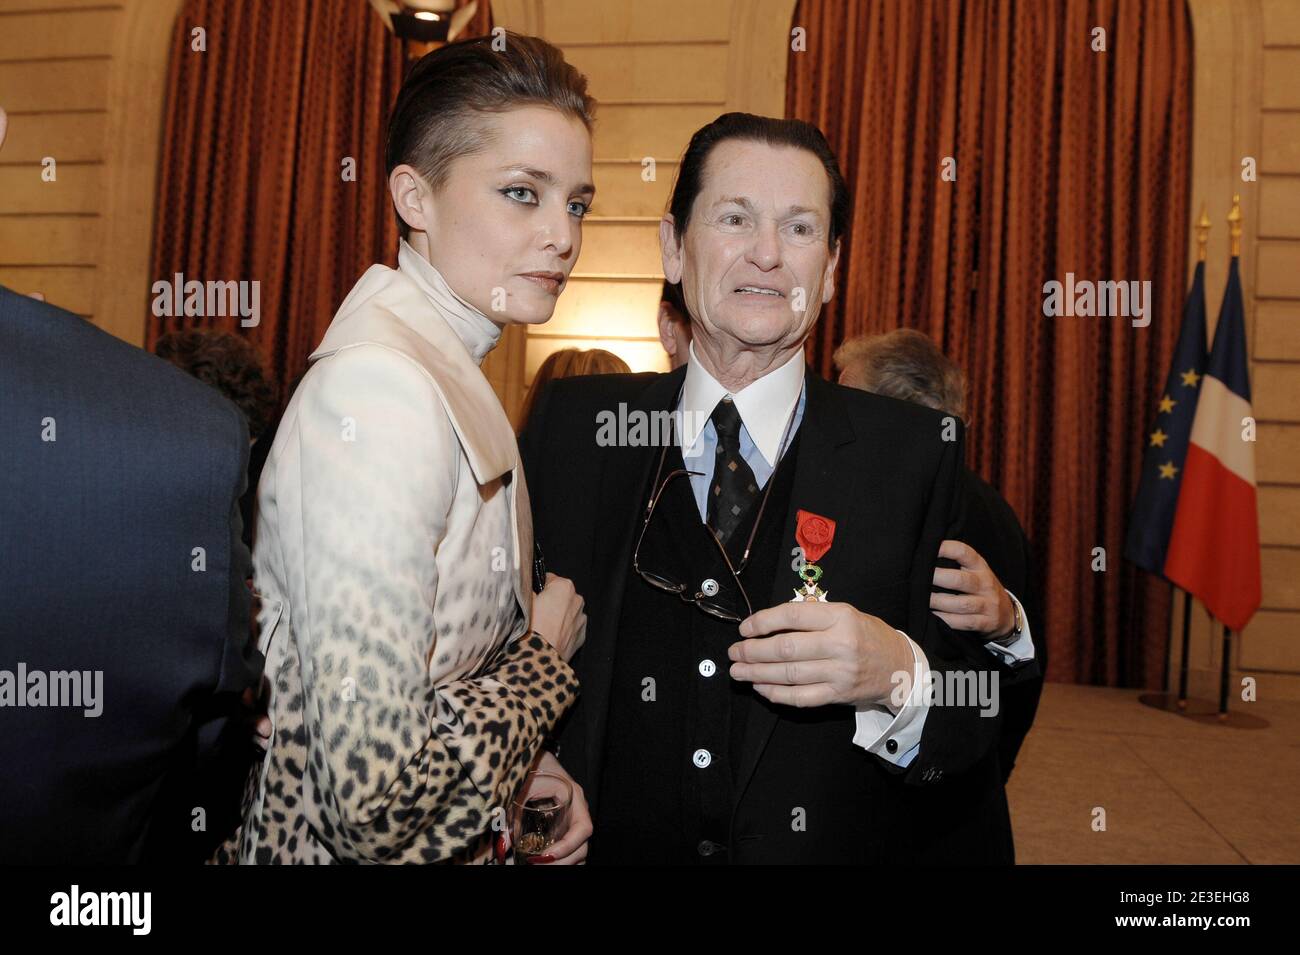 French designer Jean-Louis Scherrer and daughter Leonor at the Elysee  presidential Palace in Paris, France on January 28, 2009. French designers  Jean-Louis Scherrer and Sonia Rykiel awarding them respectively by French  President